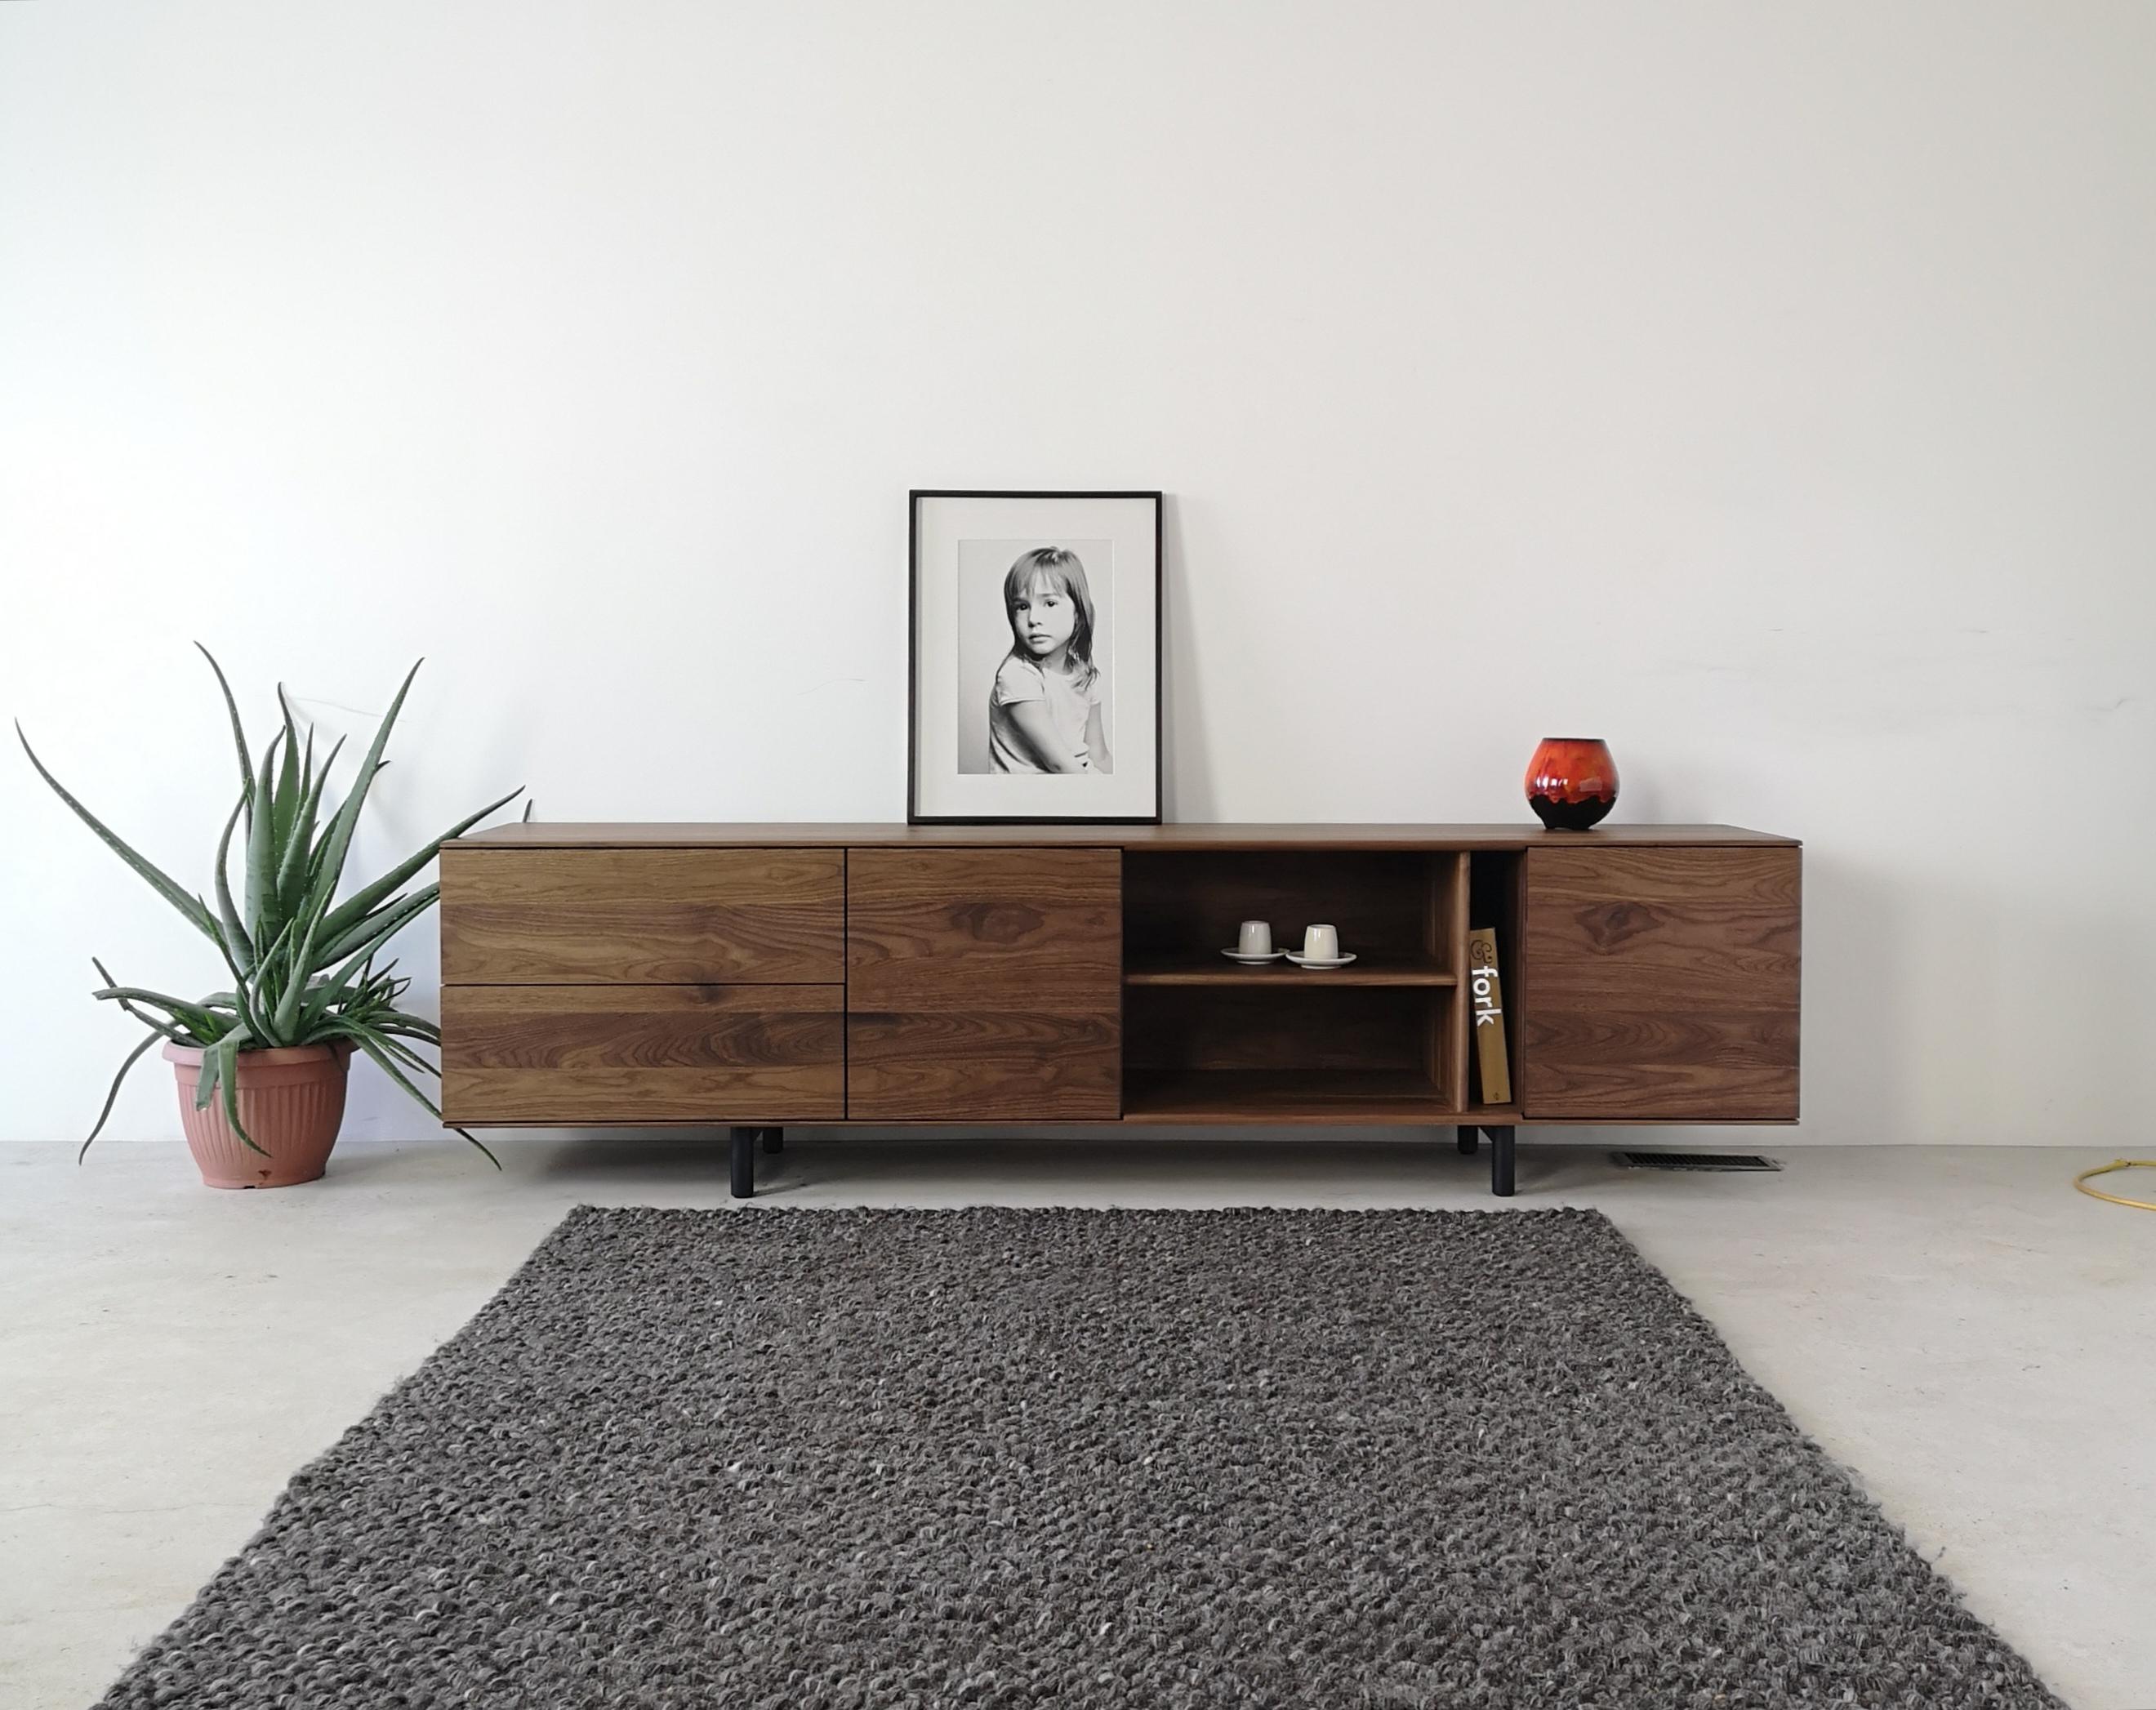 Kinetic by Izm is a solid hardwood sideboard featuring an asymmetric arrangement of drawers, doors, and open shelving w flush mounted, continuous grain faces. This modern cabinet can function as a buffet, credenza, audio/visual cabinet, or dresser.